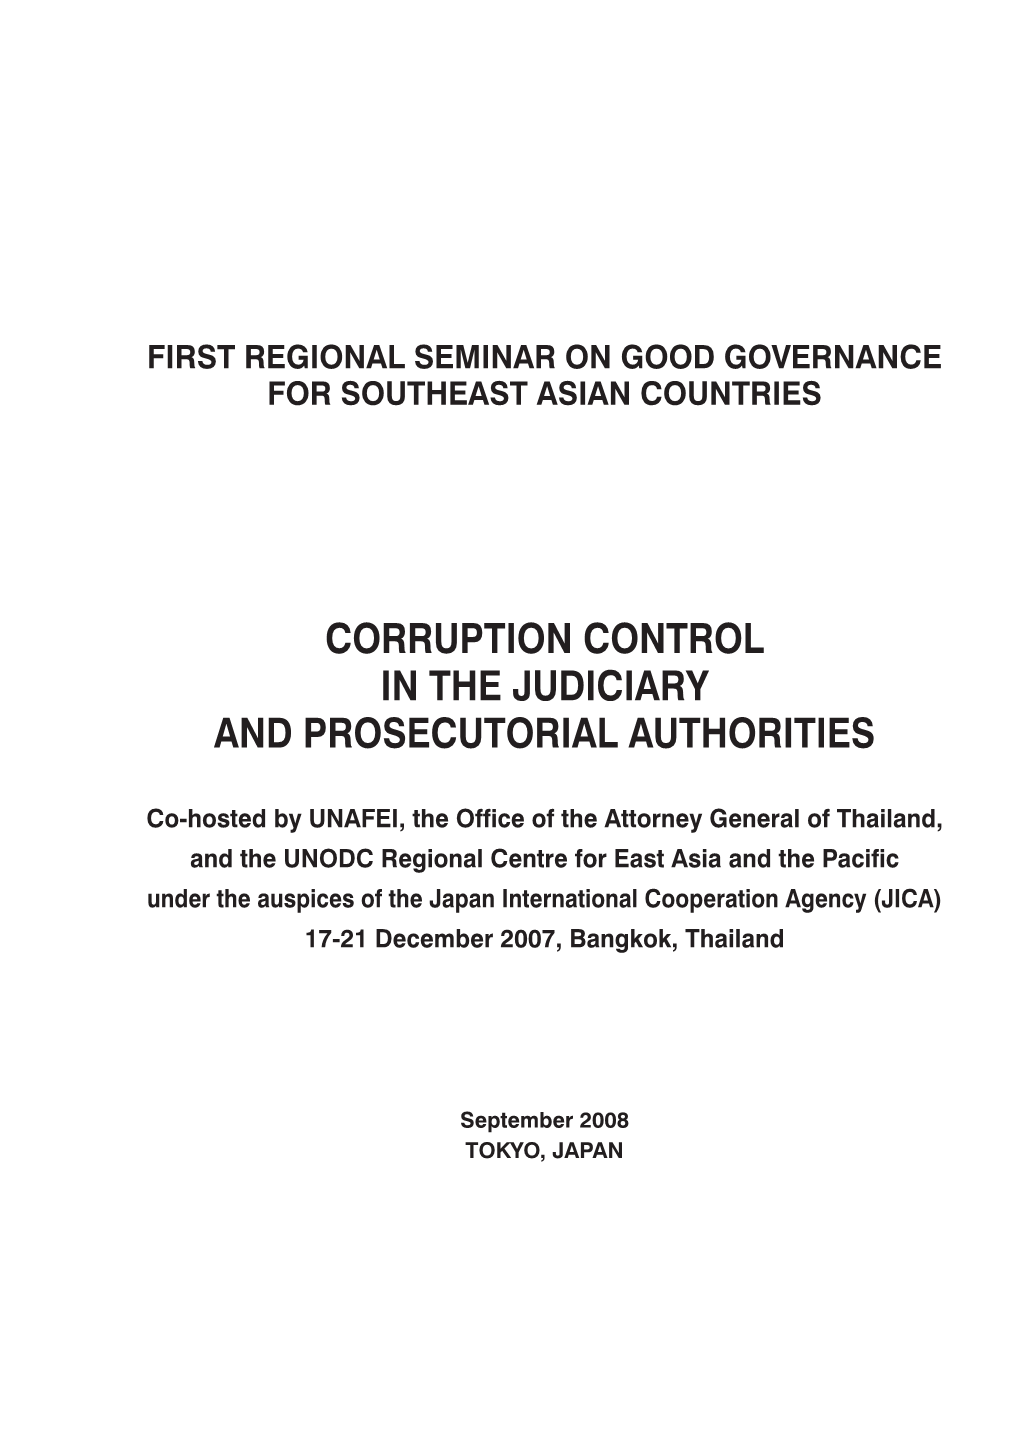 Corruption Control in the Judiciary and Prosecutorial Authorities